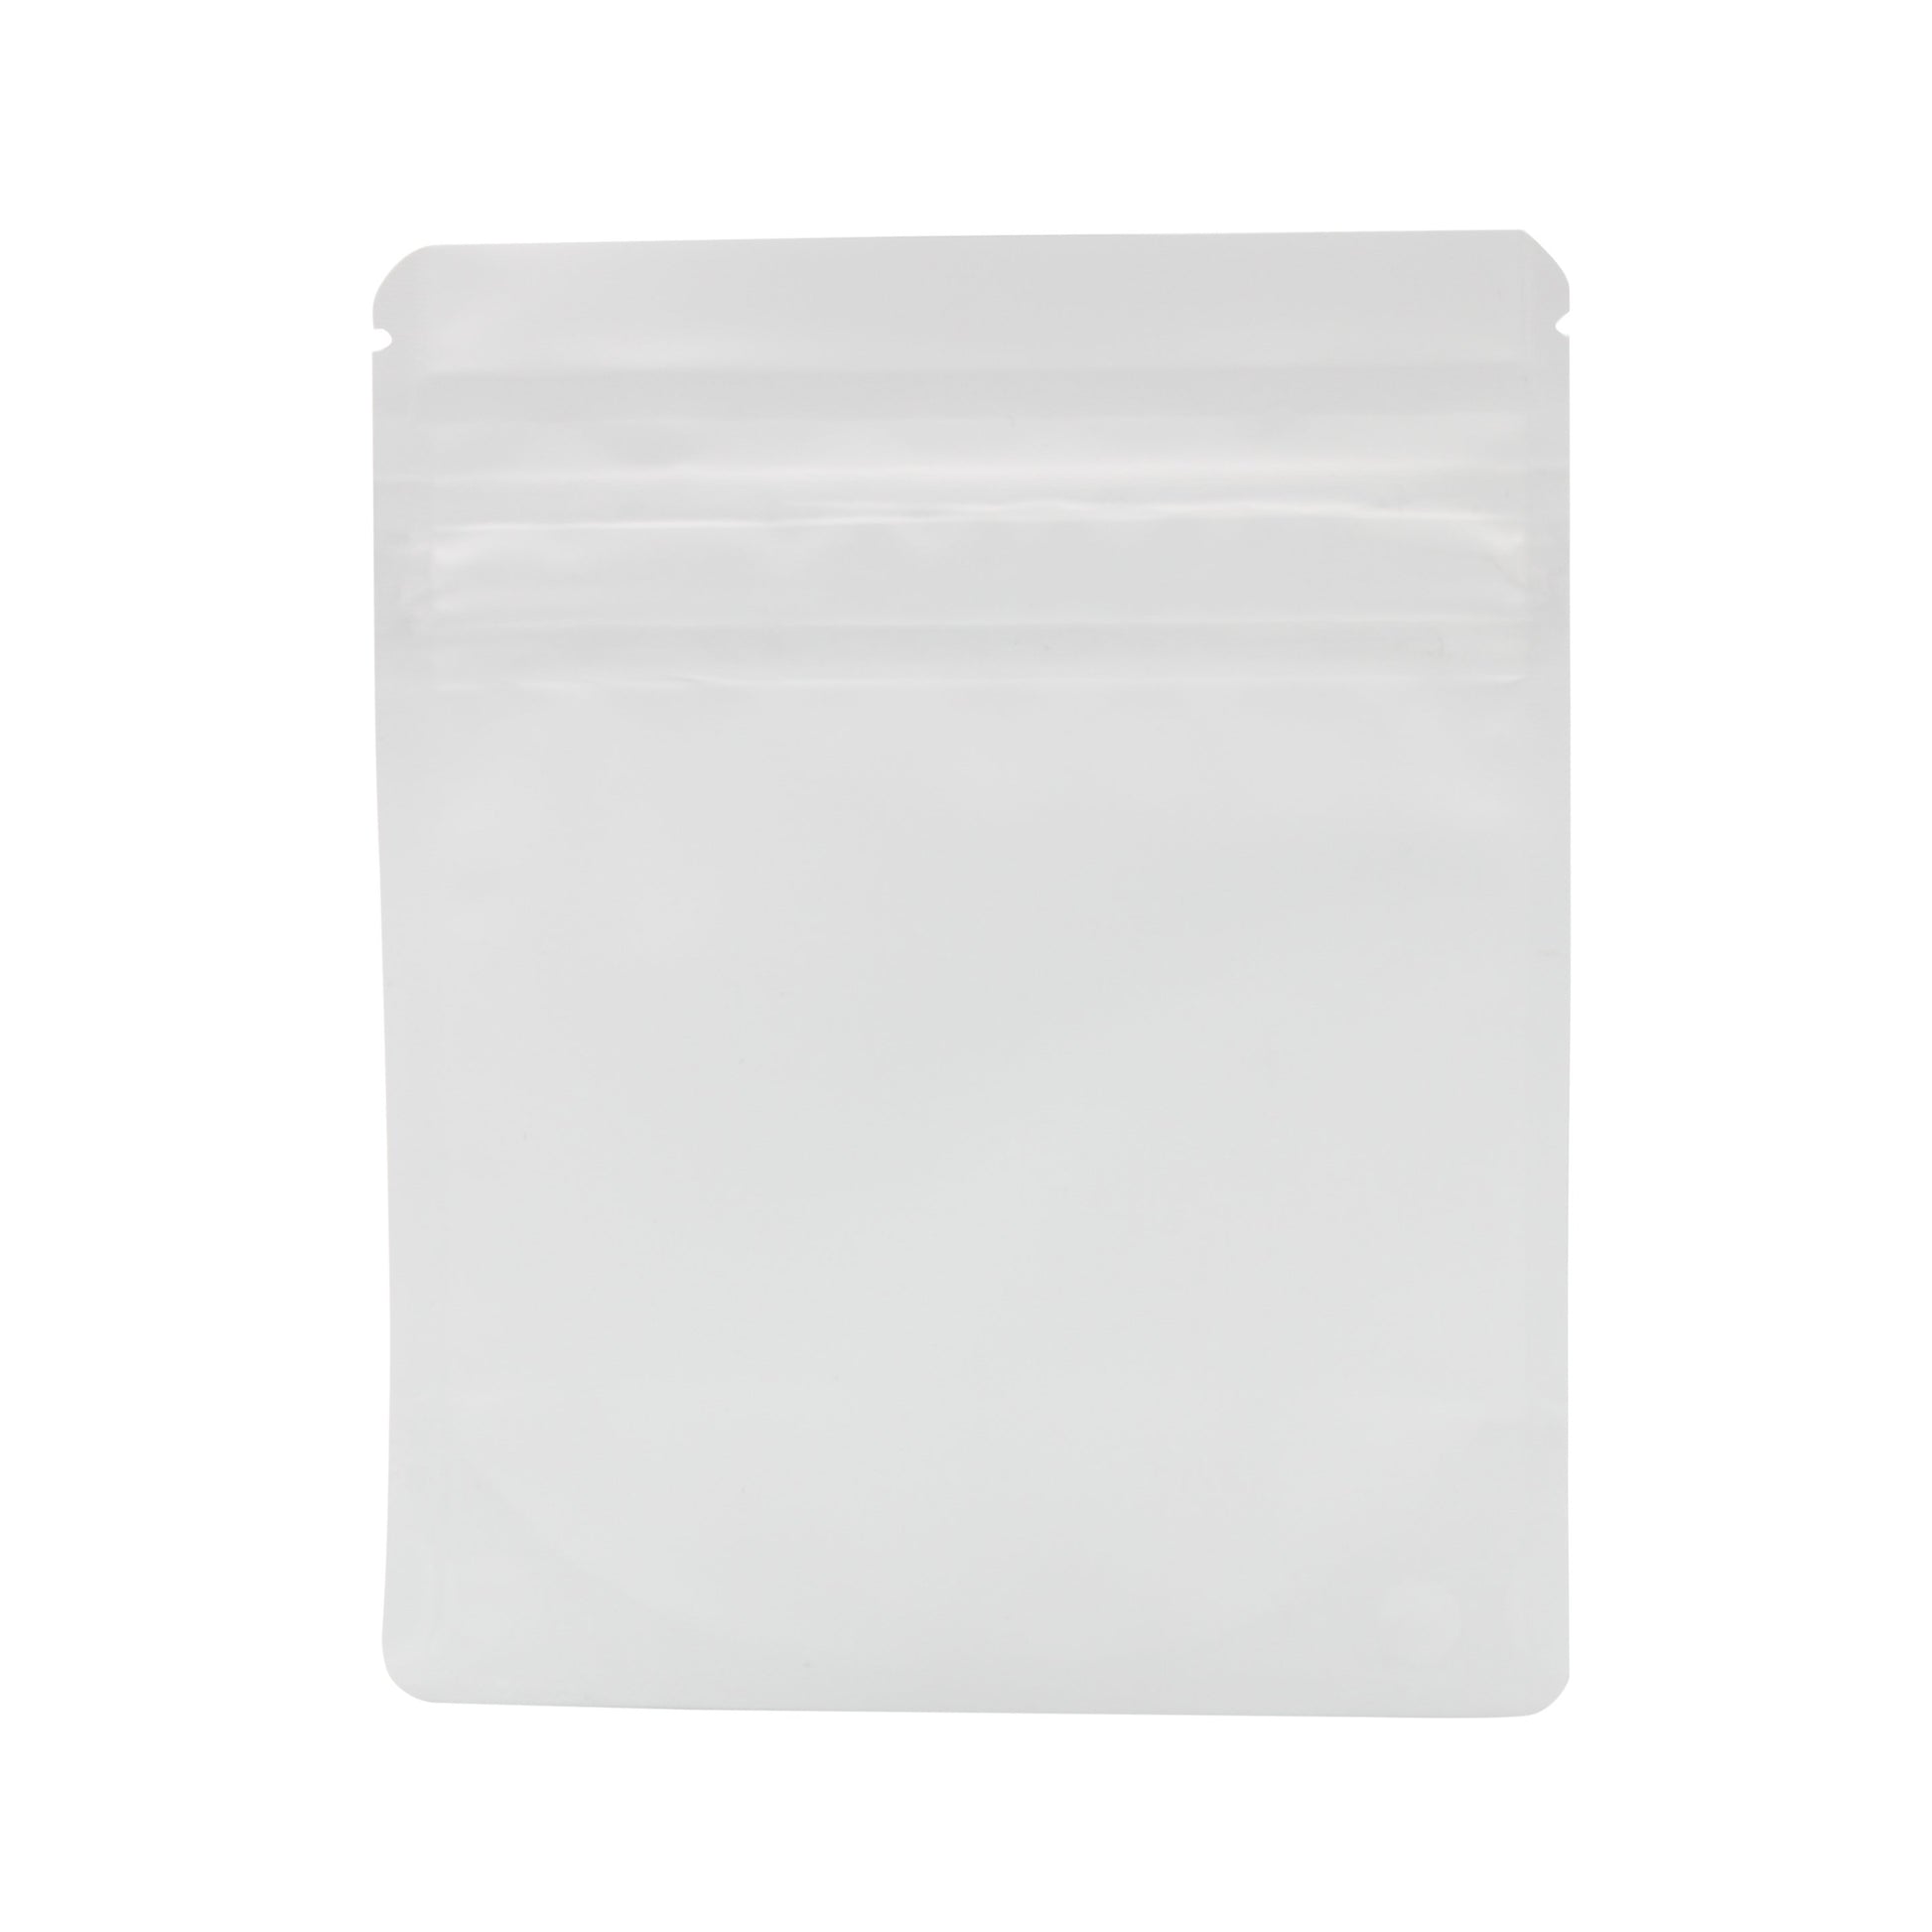 Bag King Child-Resistant Opaque Wide Mouth Bag (1/4th oz) 4.7" x 5.9" Matte White